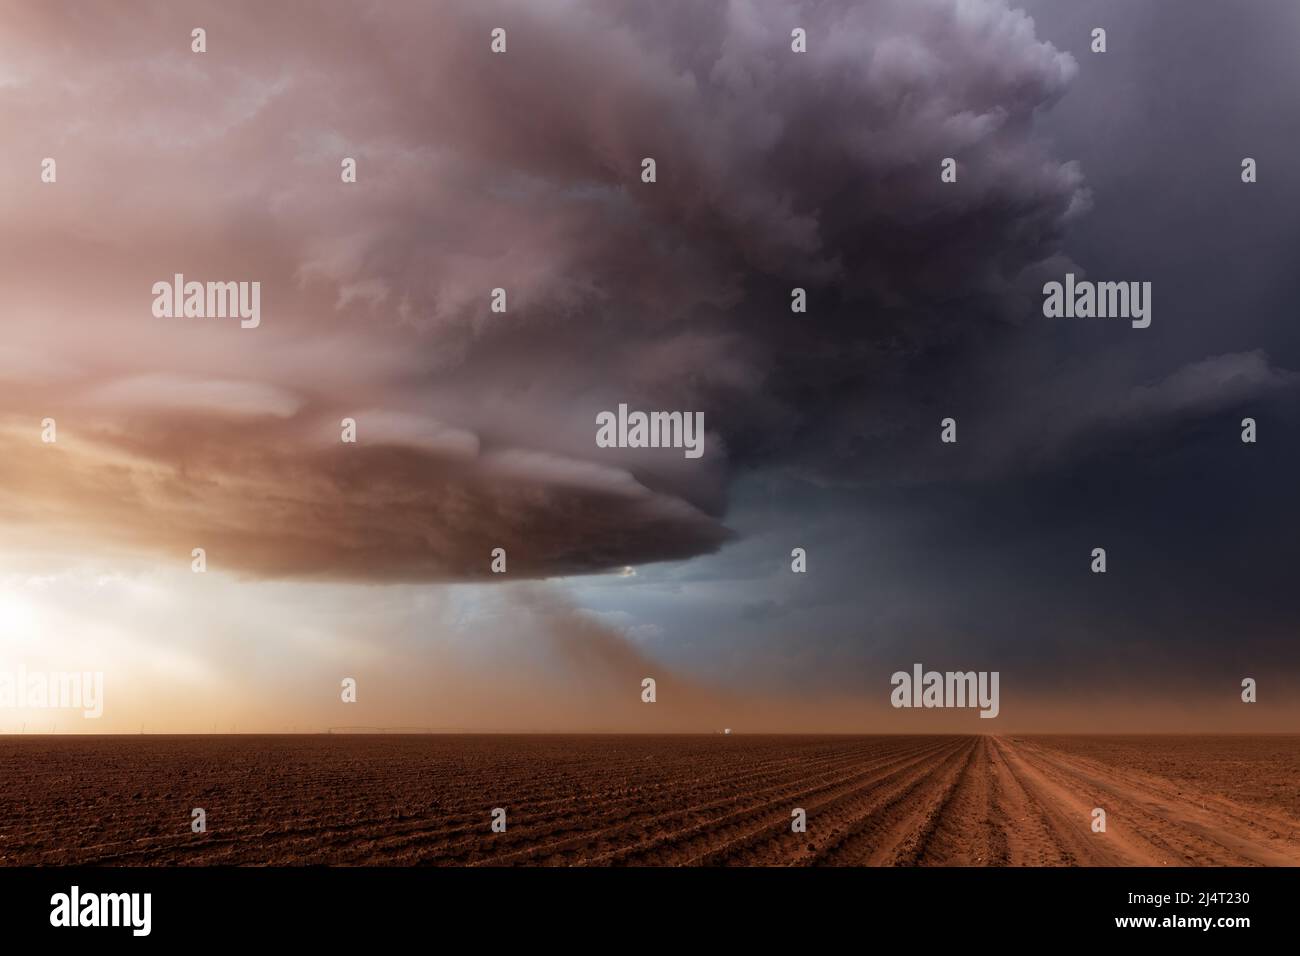 Blowing dust feeds into a supercell storm cloud over a field near Lubbock, Texas Stock Photo